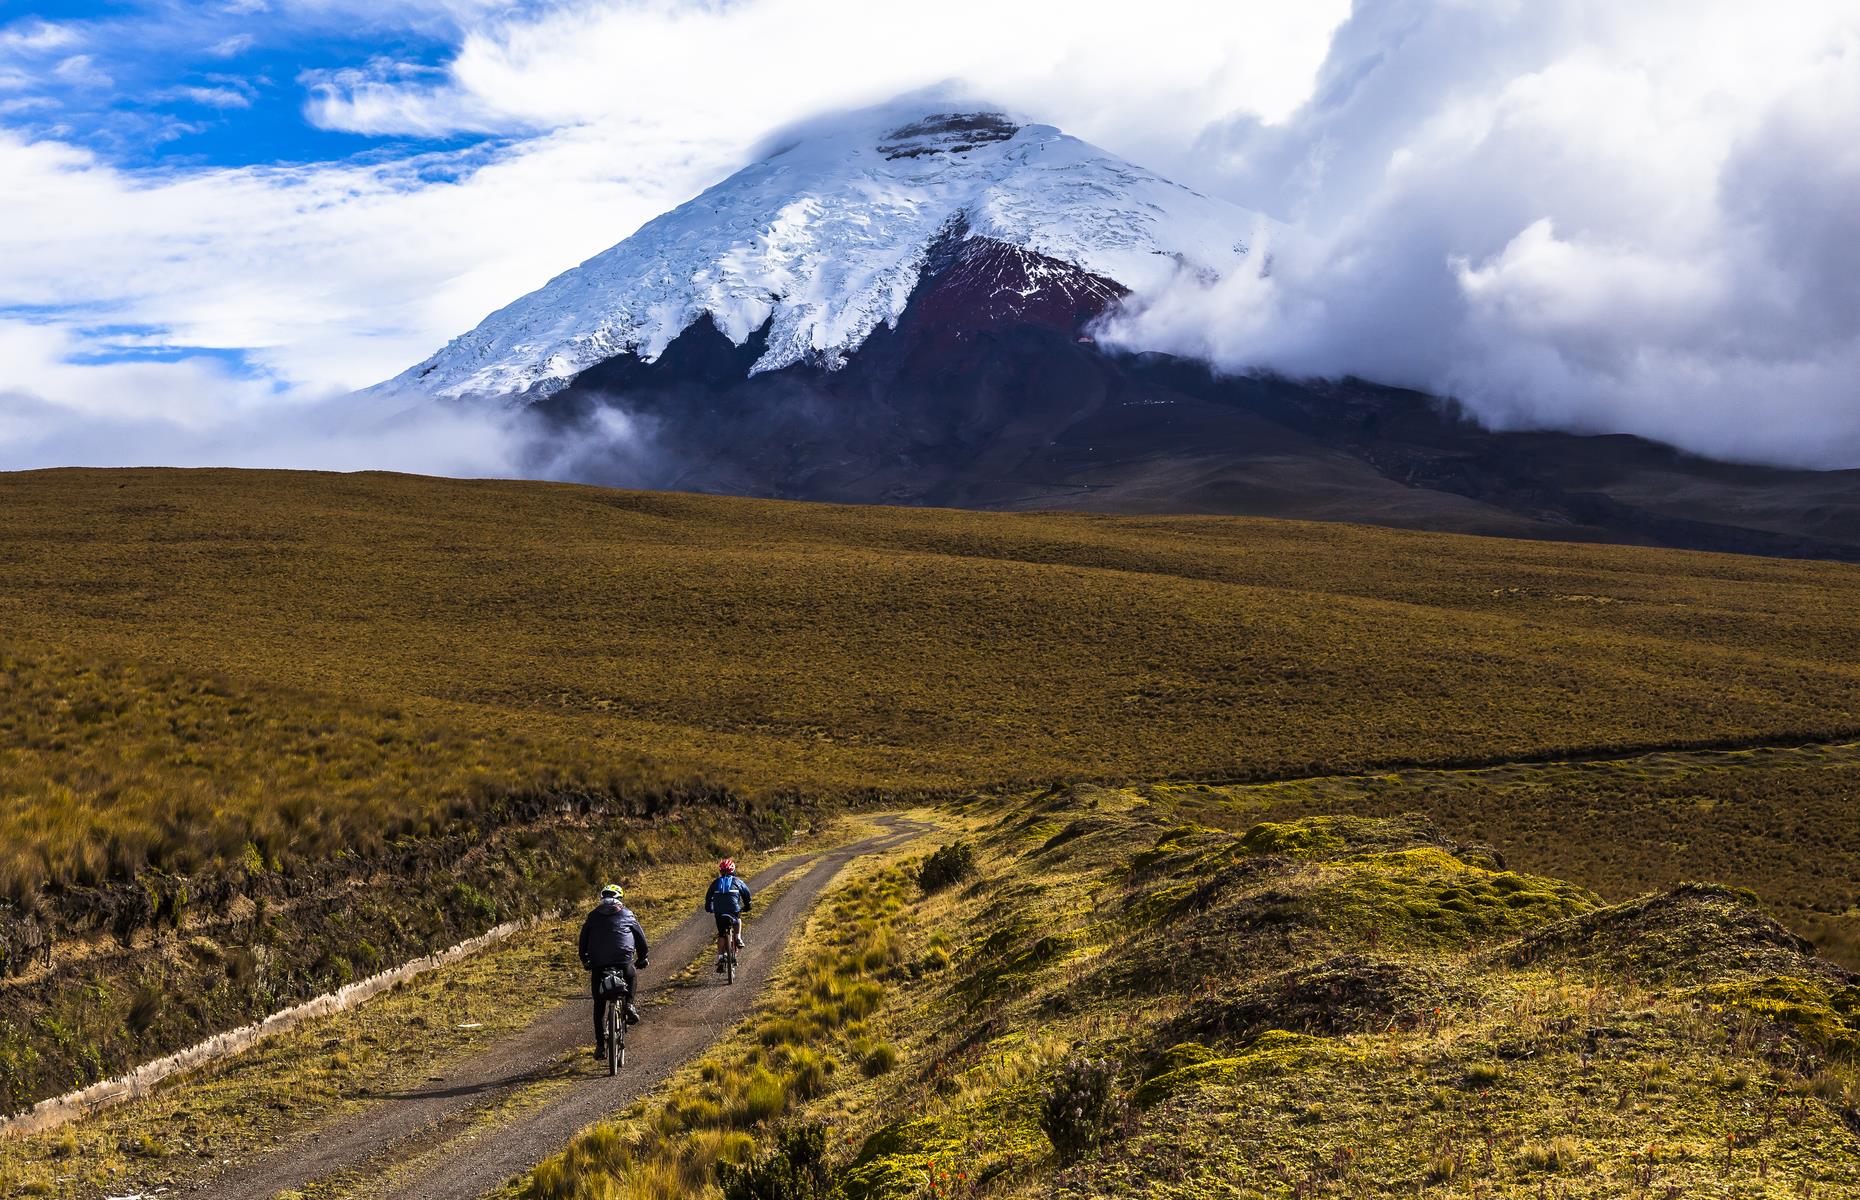 <p>The near-perfect snow cone of Cotopaxi can be seen from as far as Ecuador’s capital city, Quito, about 35 miles (56km) away. Mountain bikers can take the steep downhill from the base just below glacier level or bike the trails in Cotopaxi National Park with the volcano as a scenic backdrop.</p>